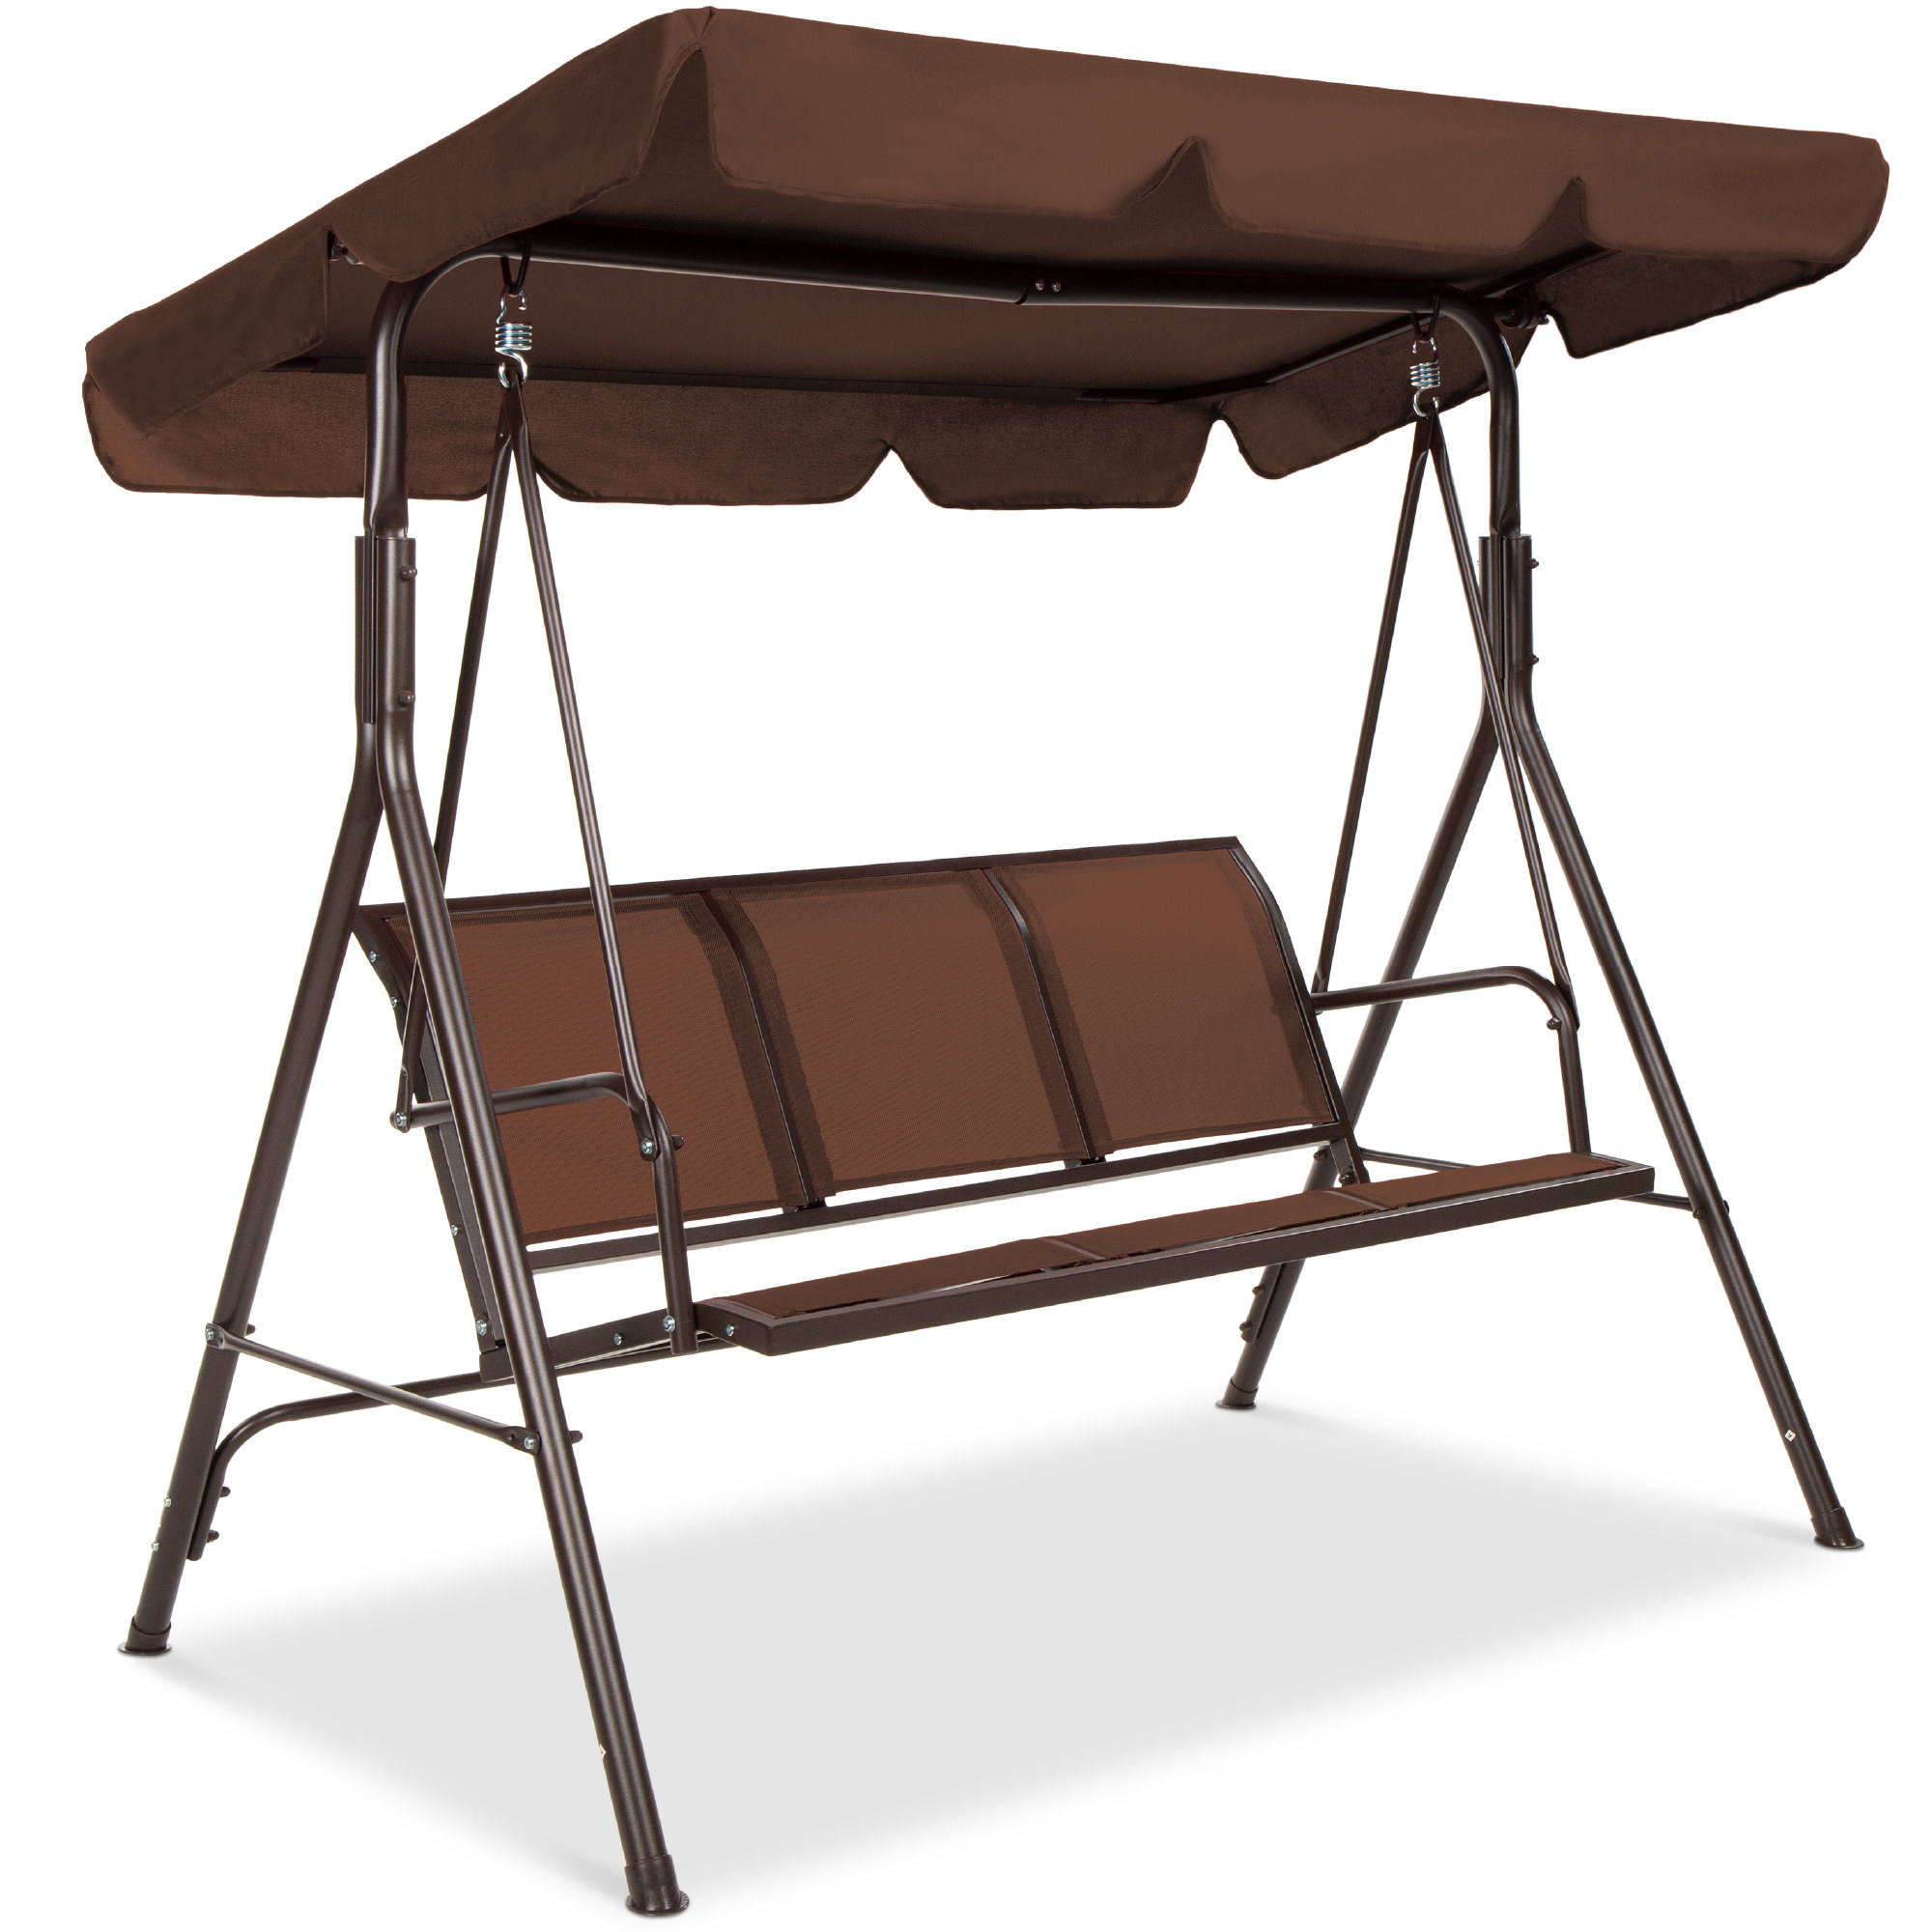 a brown three-person swing seat with an attached awning 